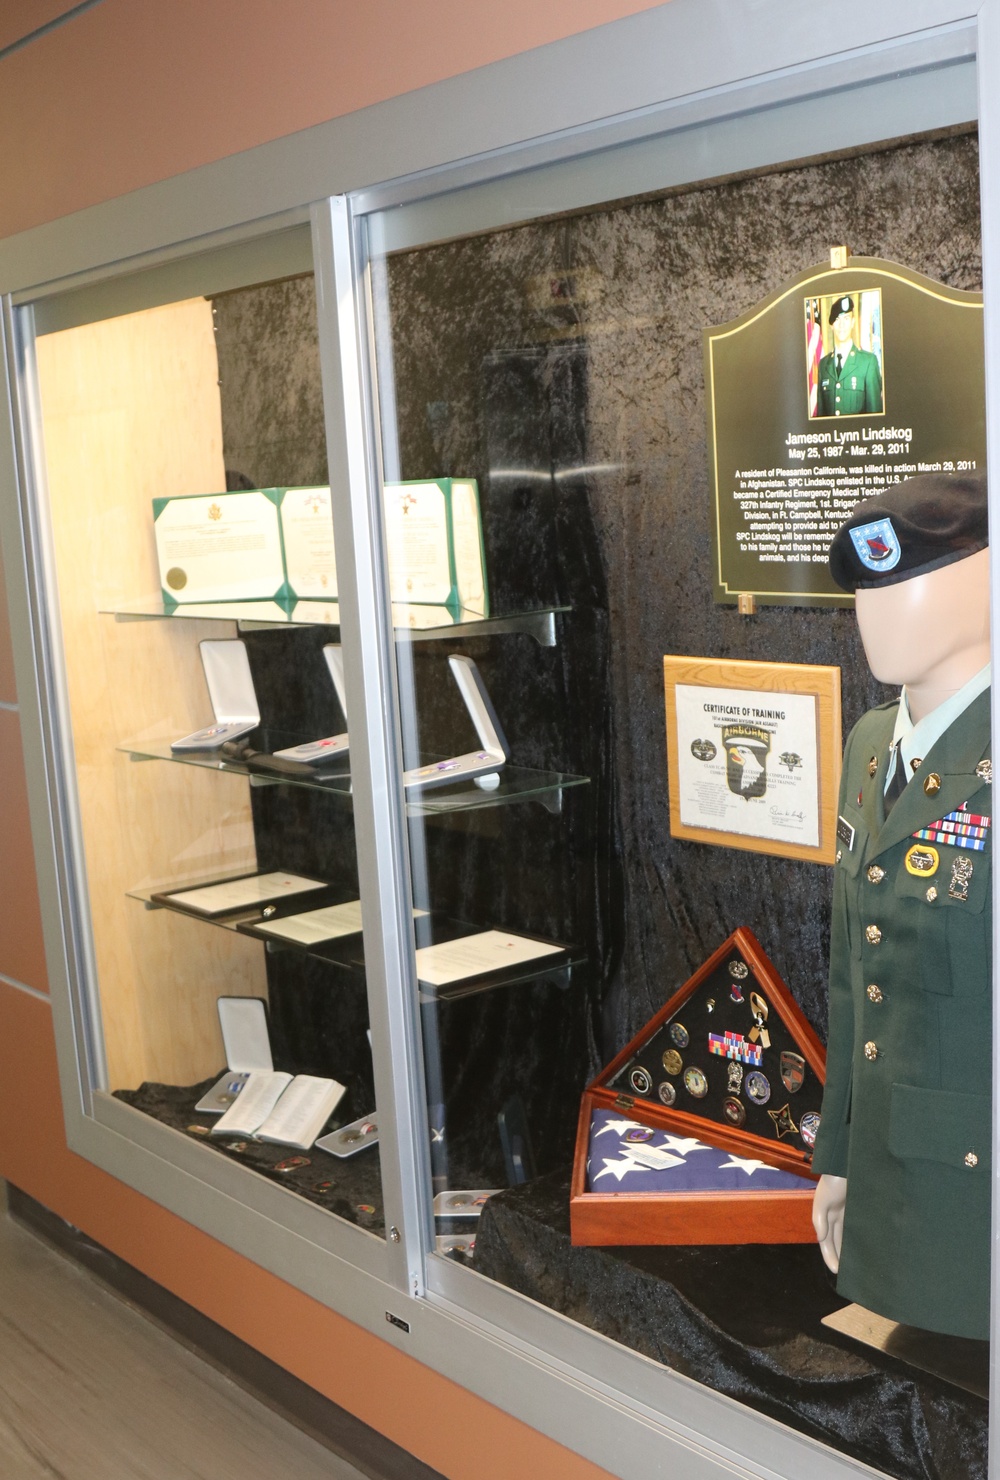 Army Reserve Center memorialization honors fallen Soldier at PRFTA